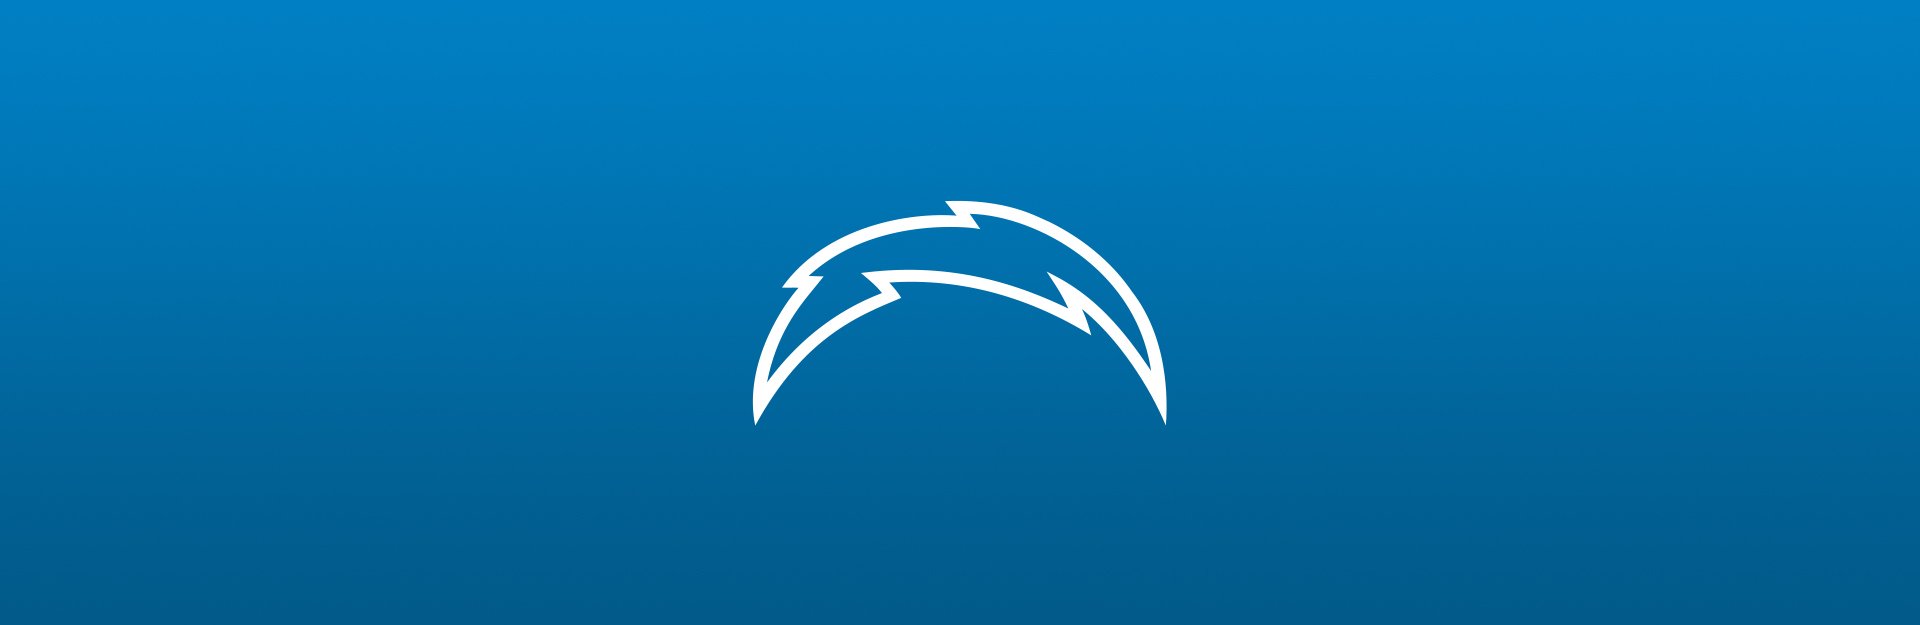 Los Angeles Chargers logo on blue background